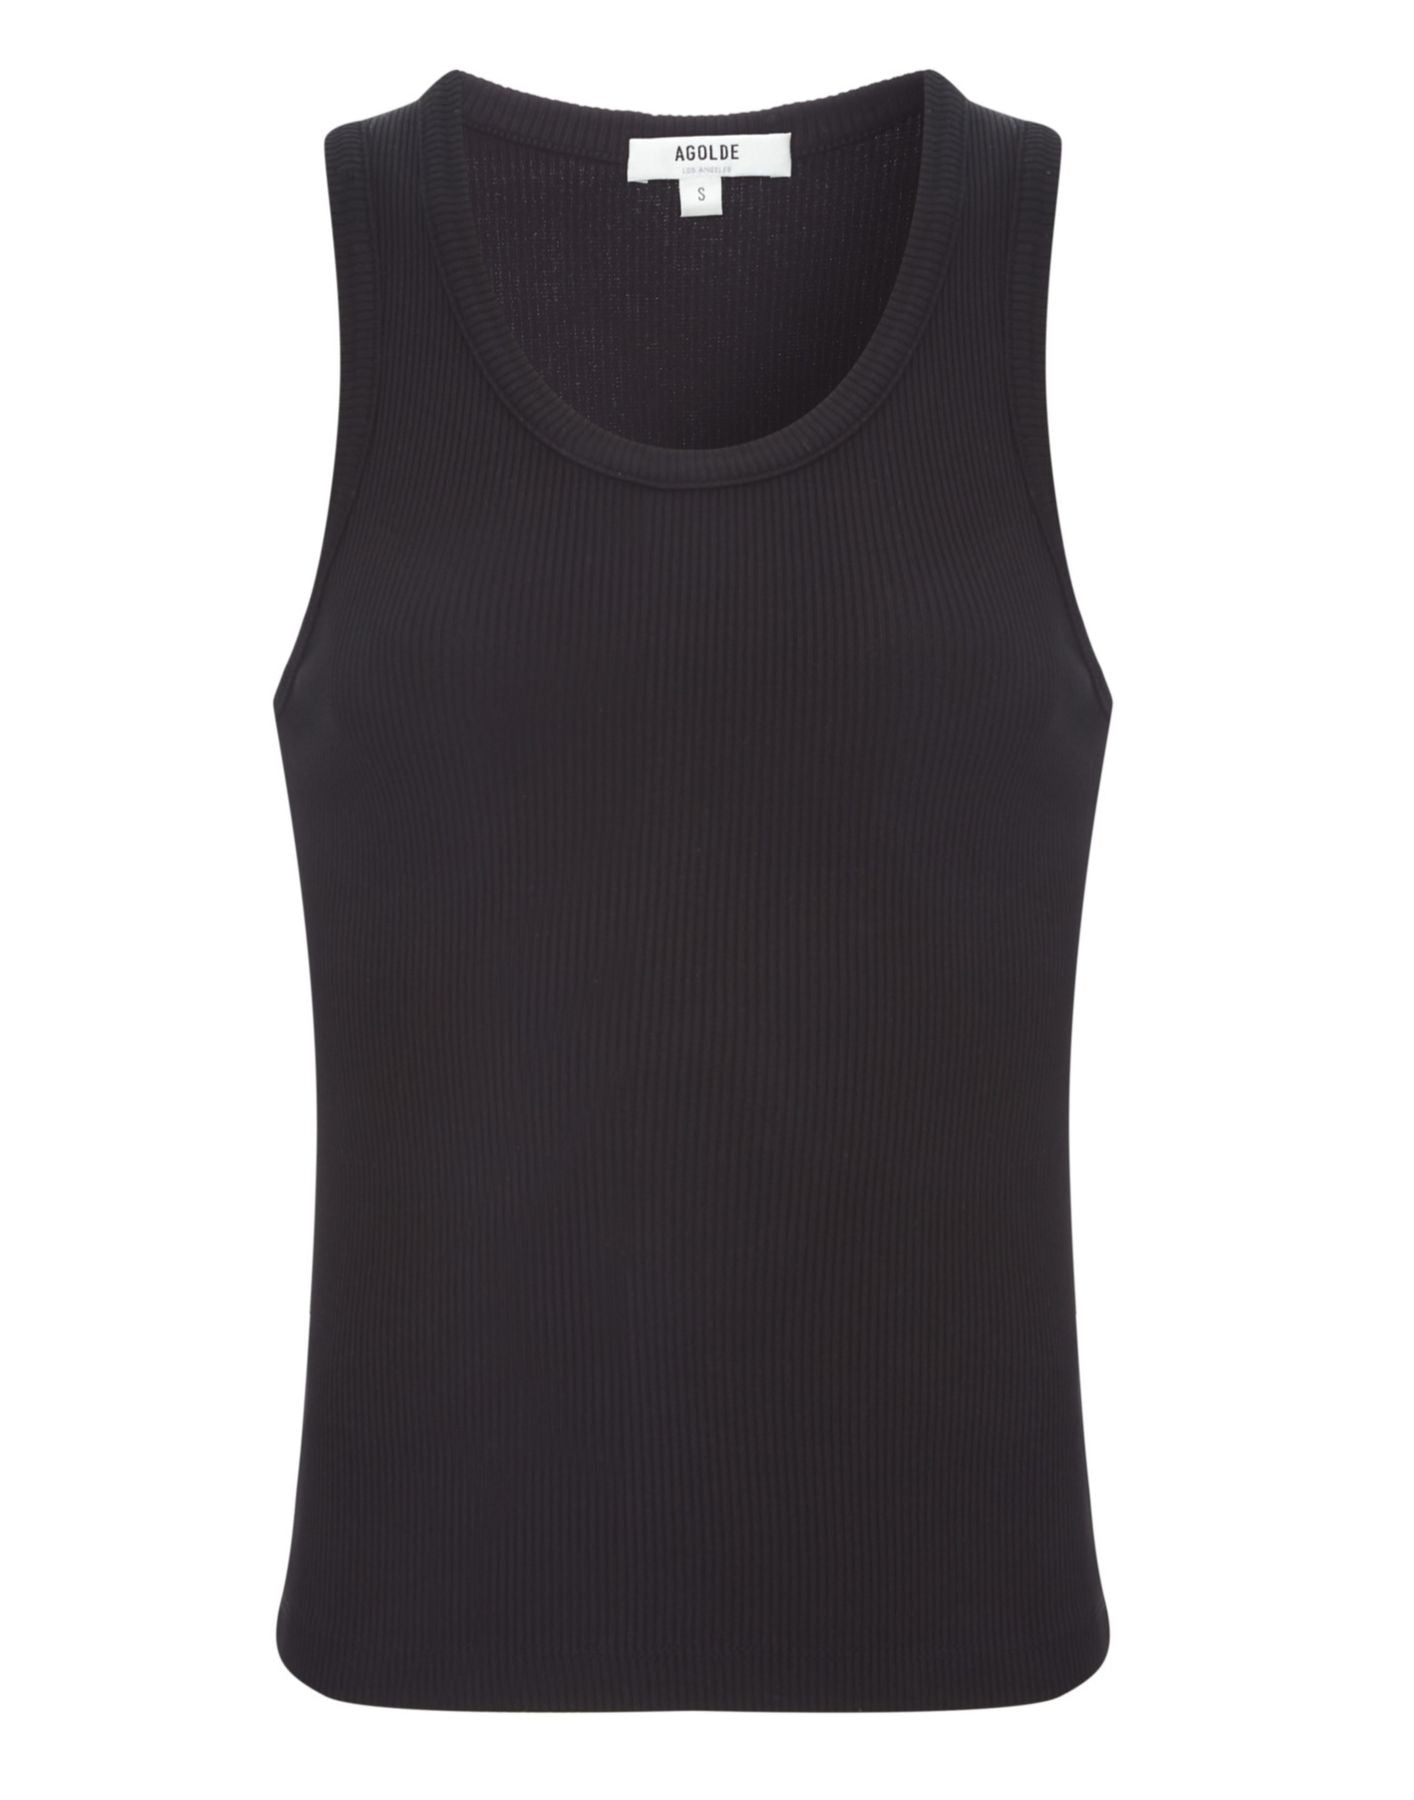 Tank top for woman A7056-1260 BEETLE Agolde